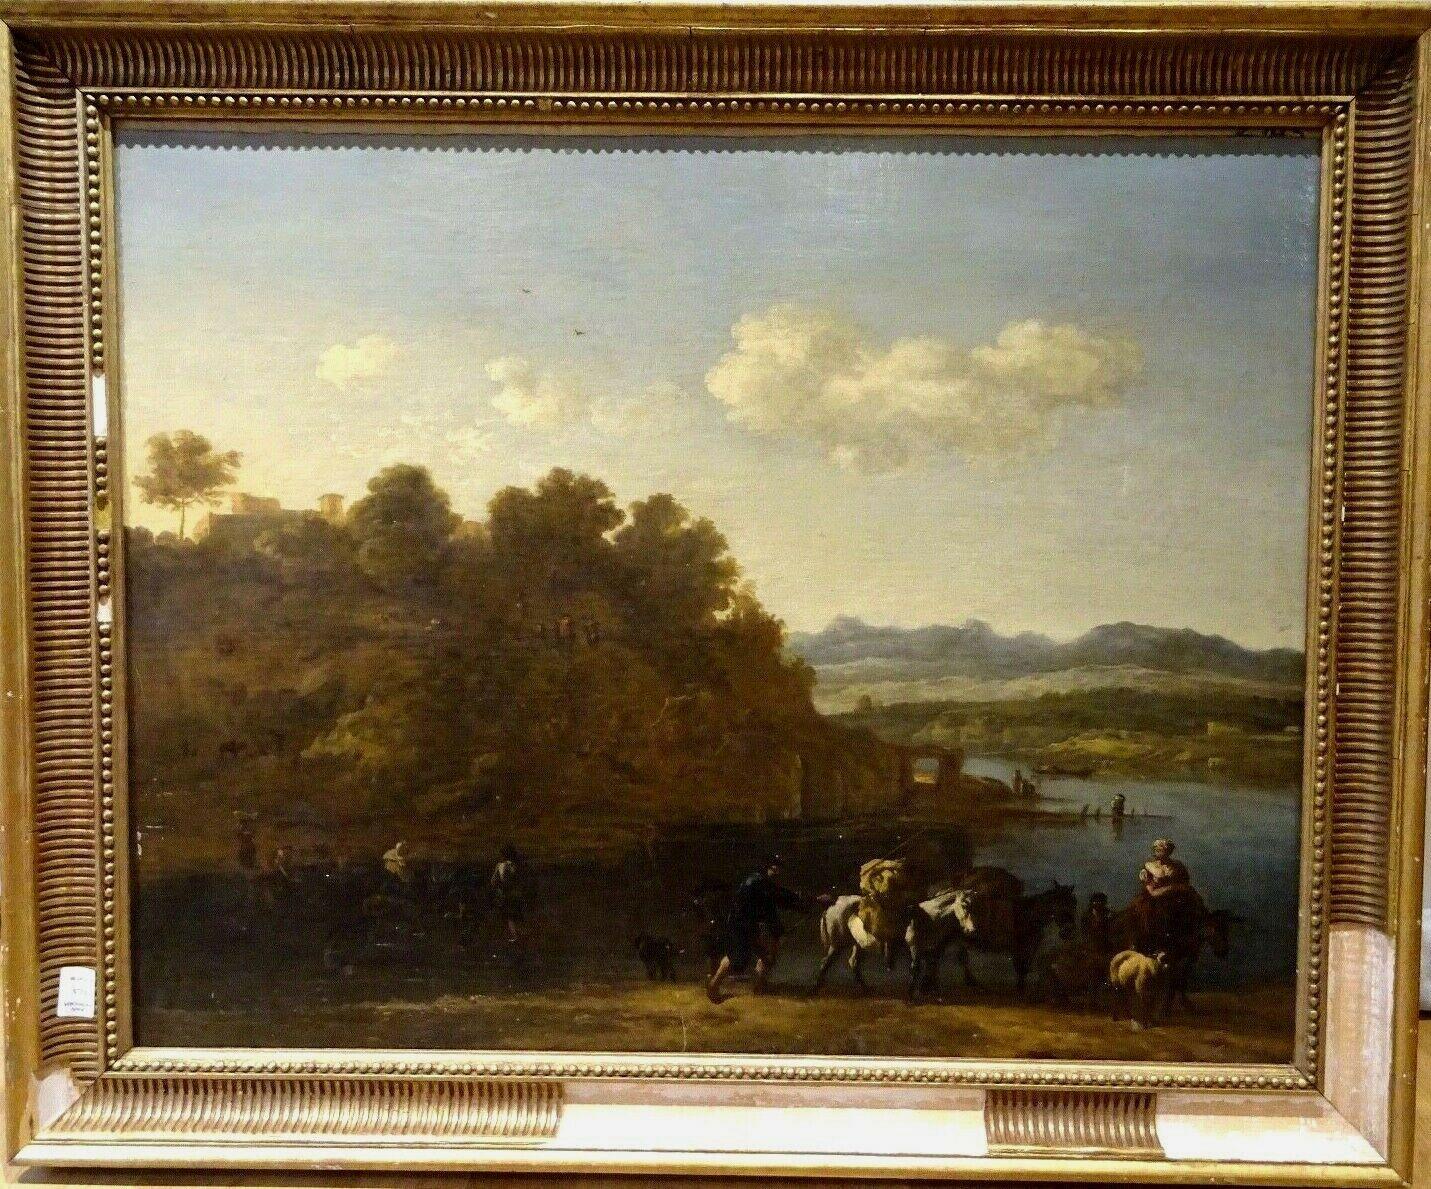 Johann Melchior Roos Landscape Painting - Figures & Cattle In A River Landscape, 17th Century